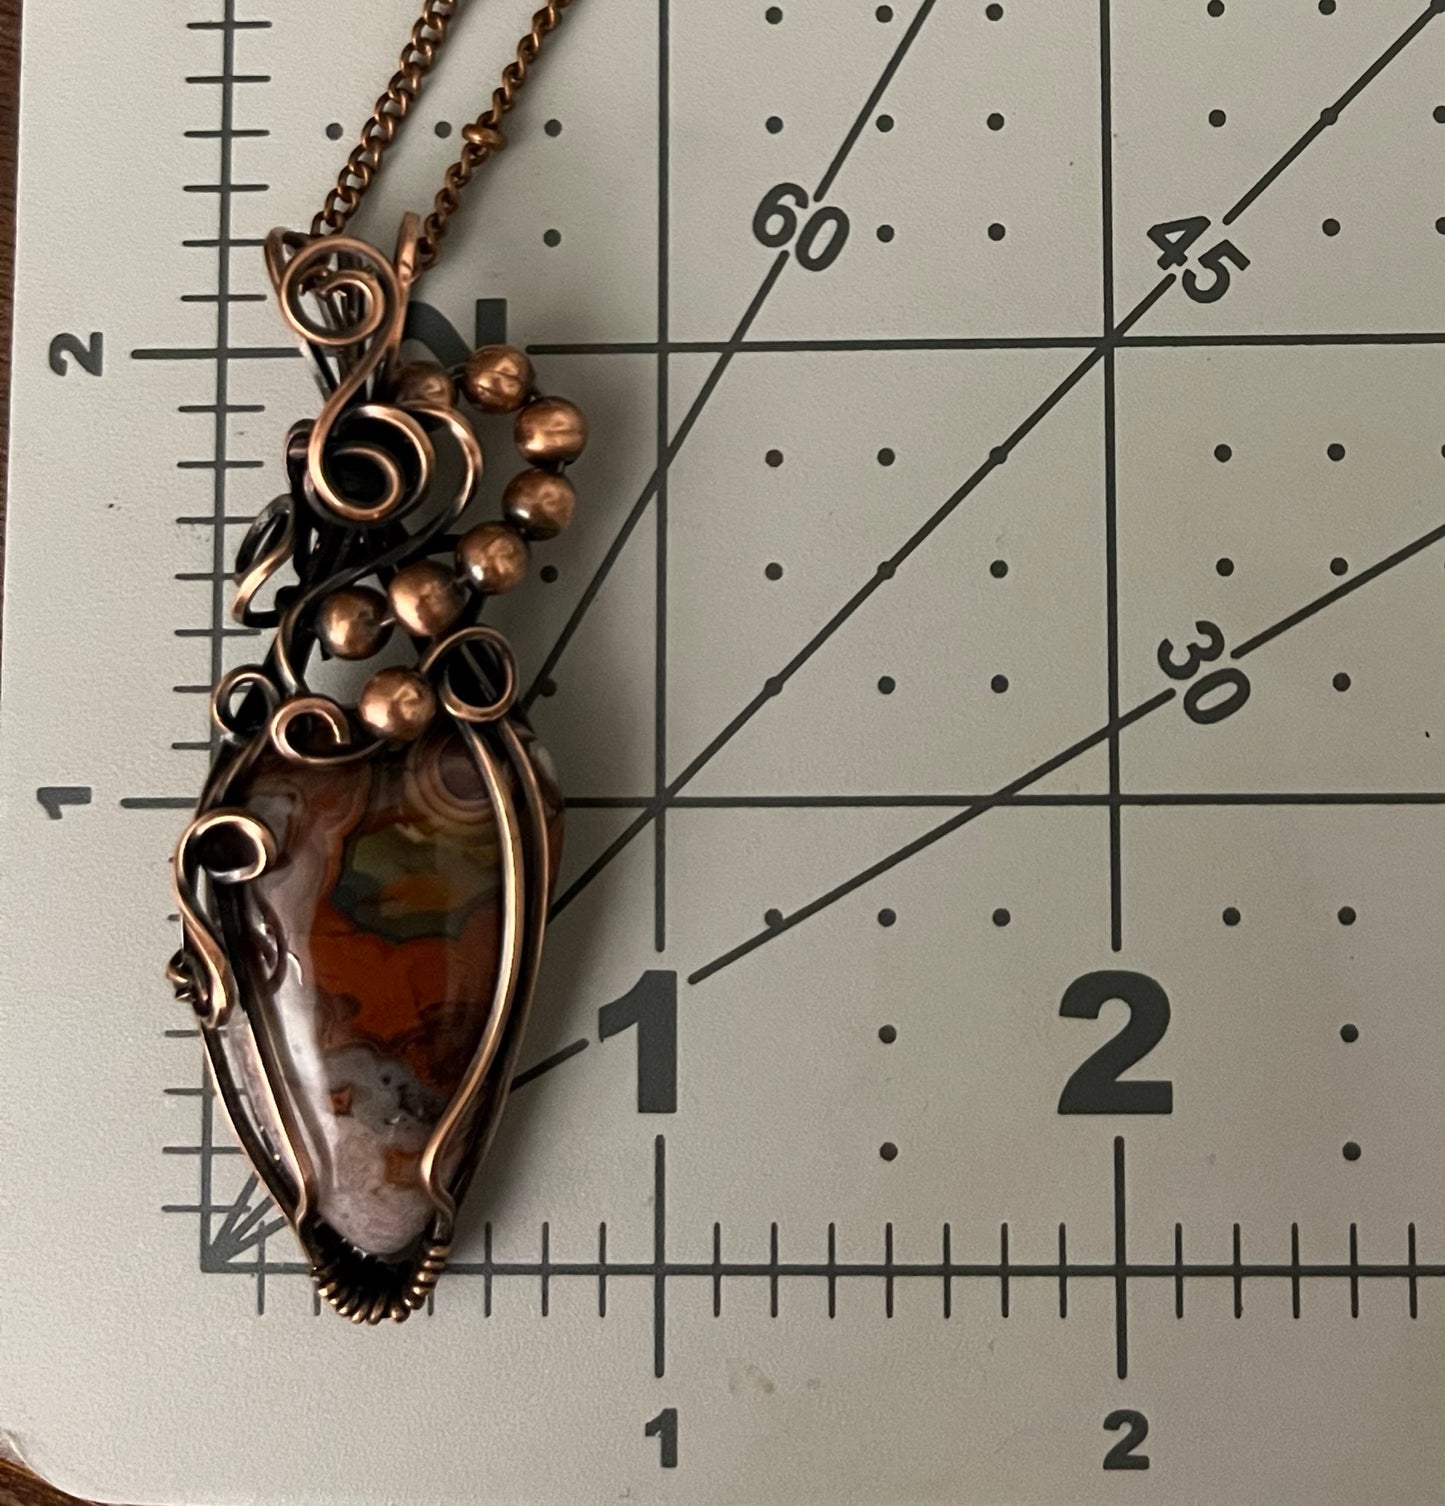 Teardrop Crazy Lace Agate Handmade Wire Wrapped Pendant